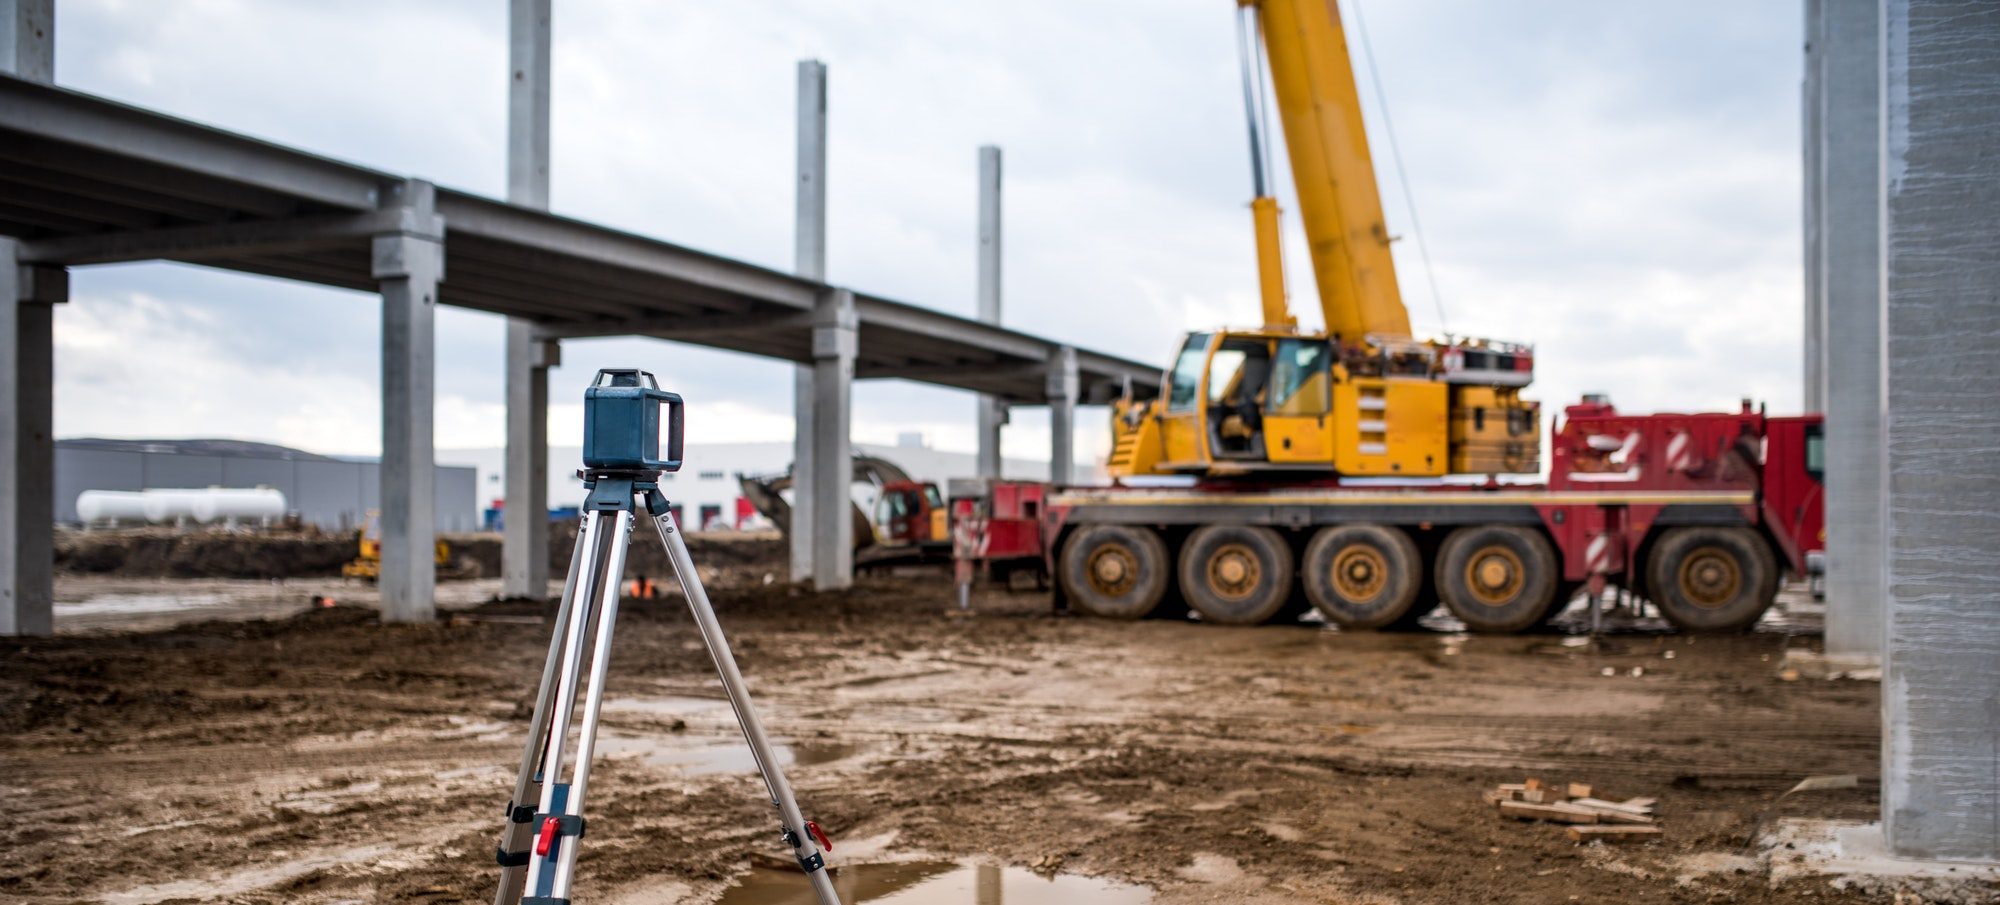 Industrial engineering with theodolite, gps, total station and tools at construction site